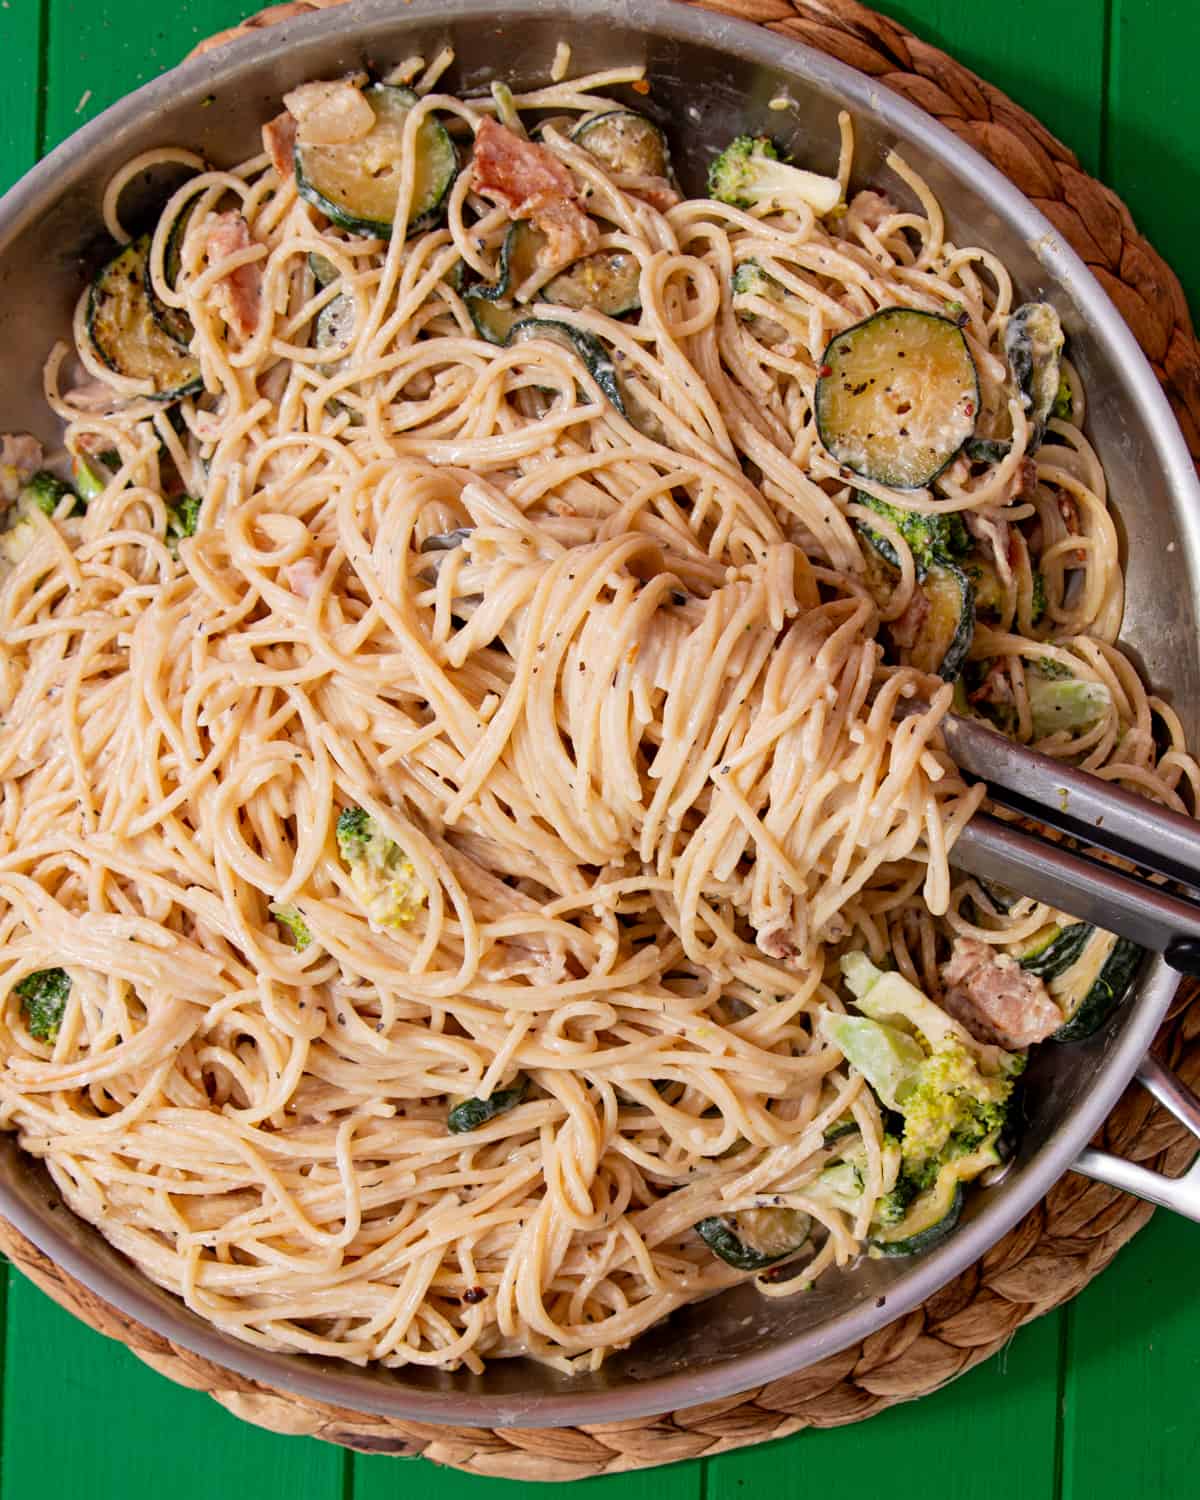 A close up of the creamy spaghetti with courgette rounds, bacon and broccoli in a large metal pan.